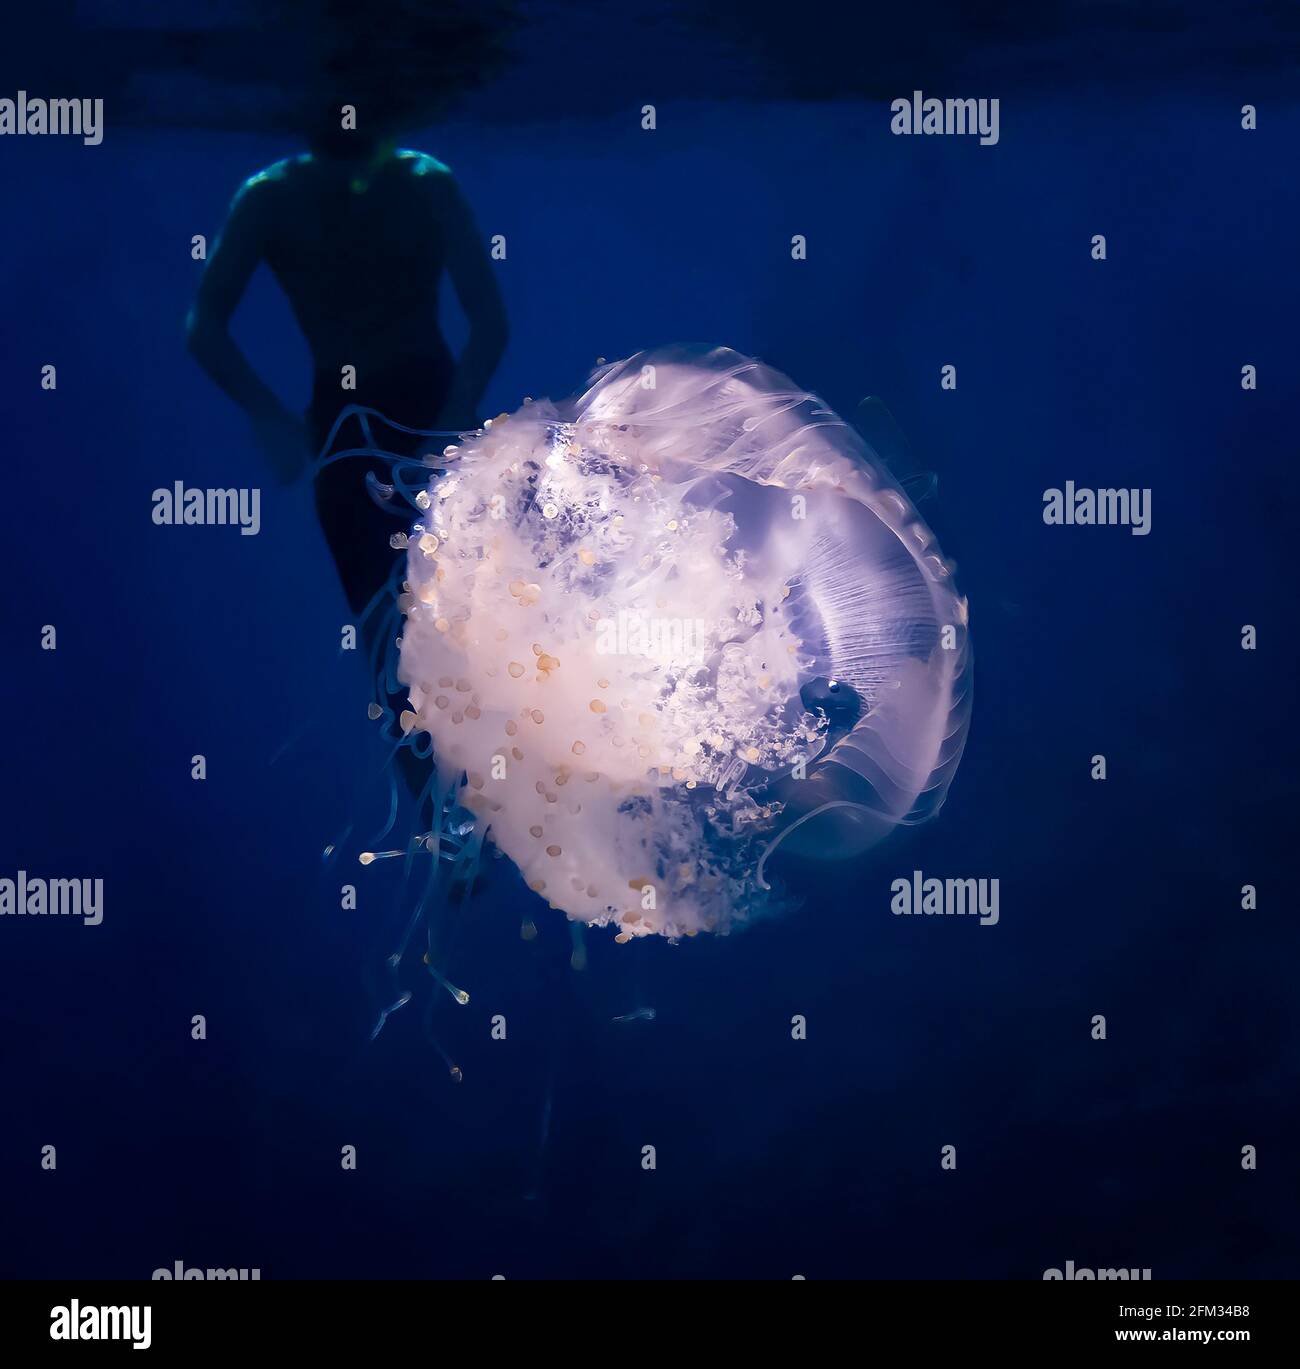 Glowing white crown jellyfish in deep blue water with snorkeler in silhouette beyond. Stock Photo